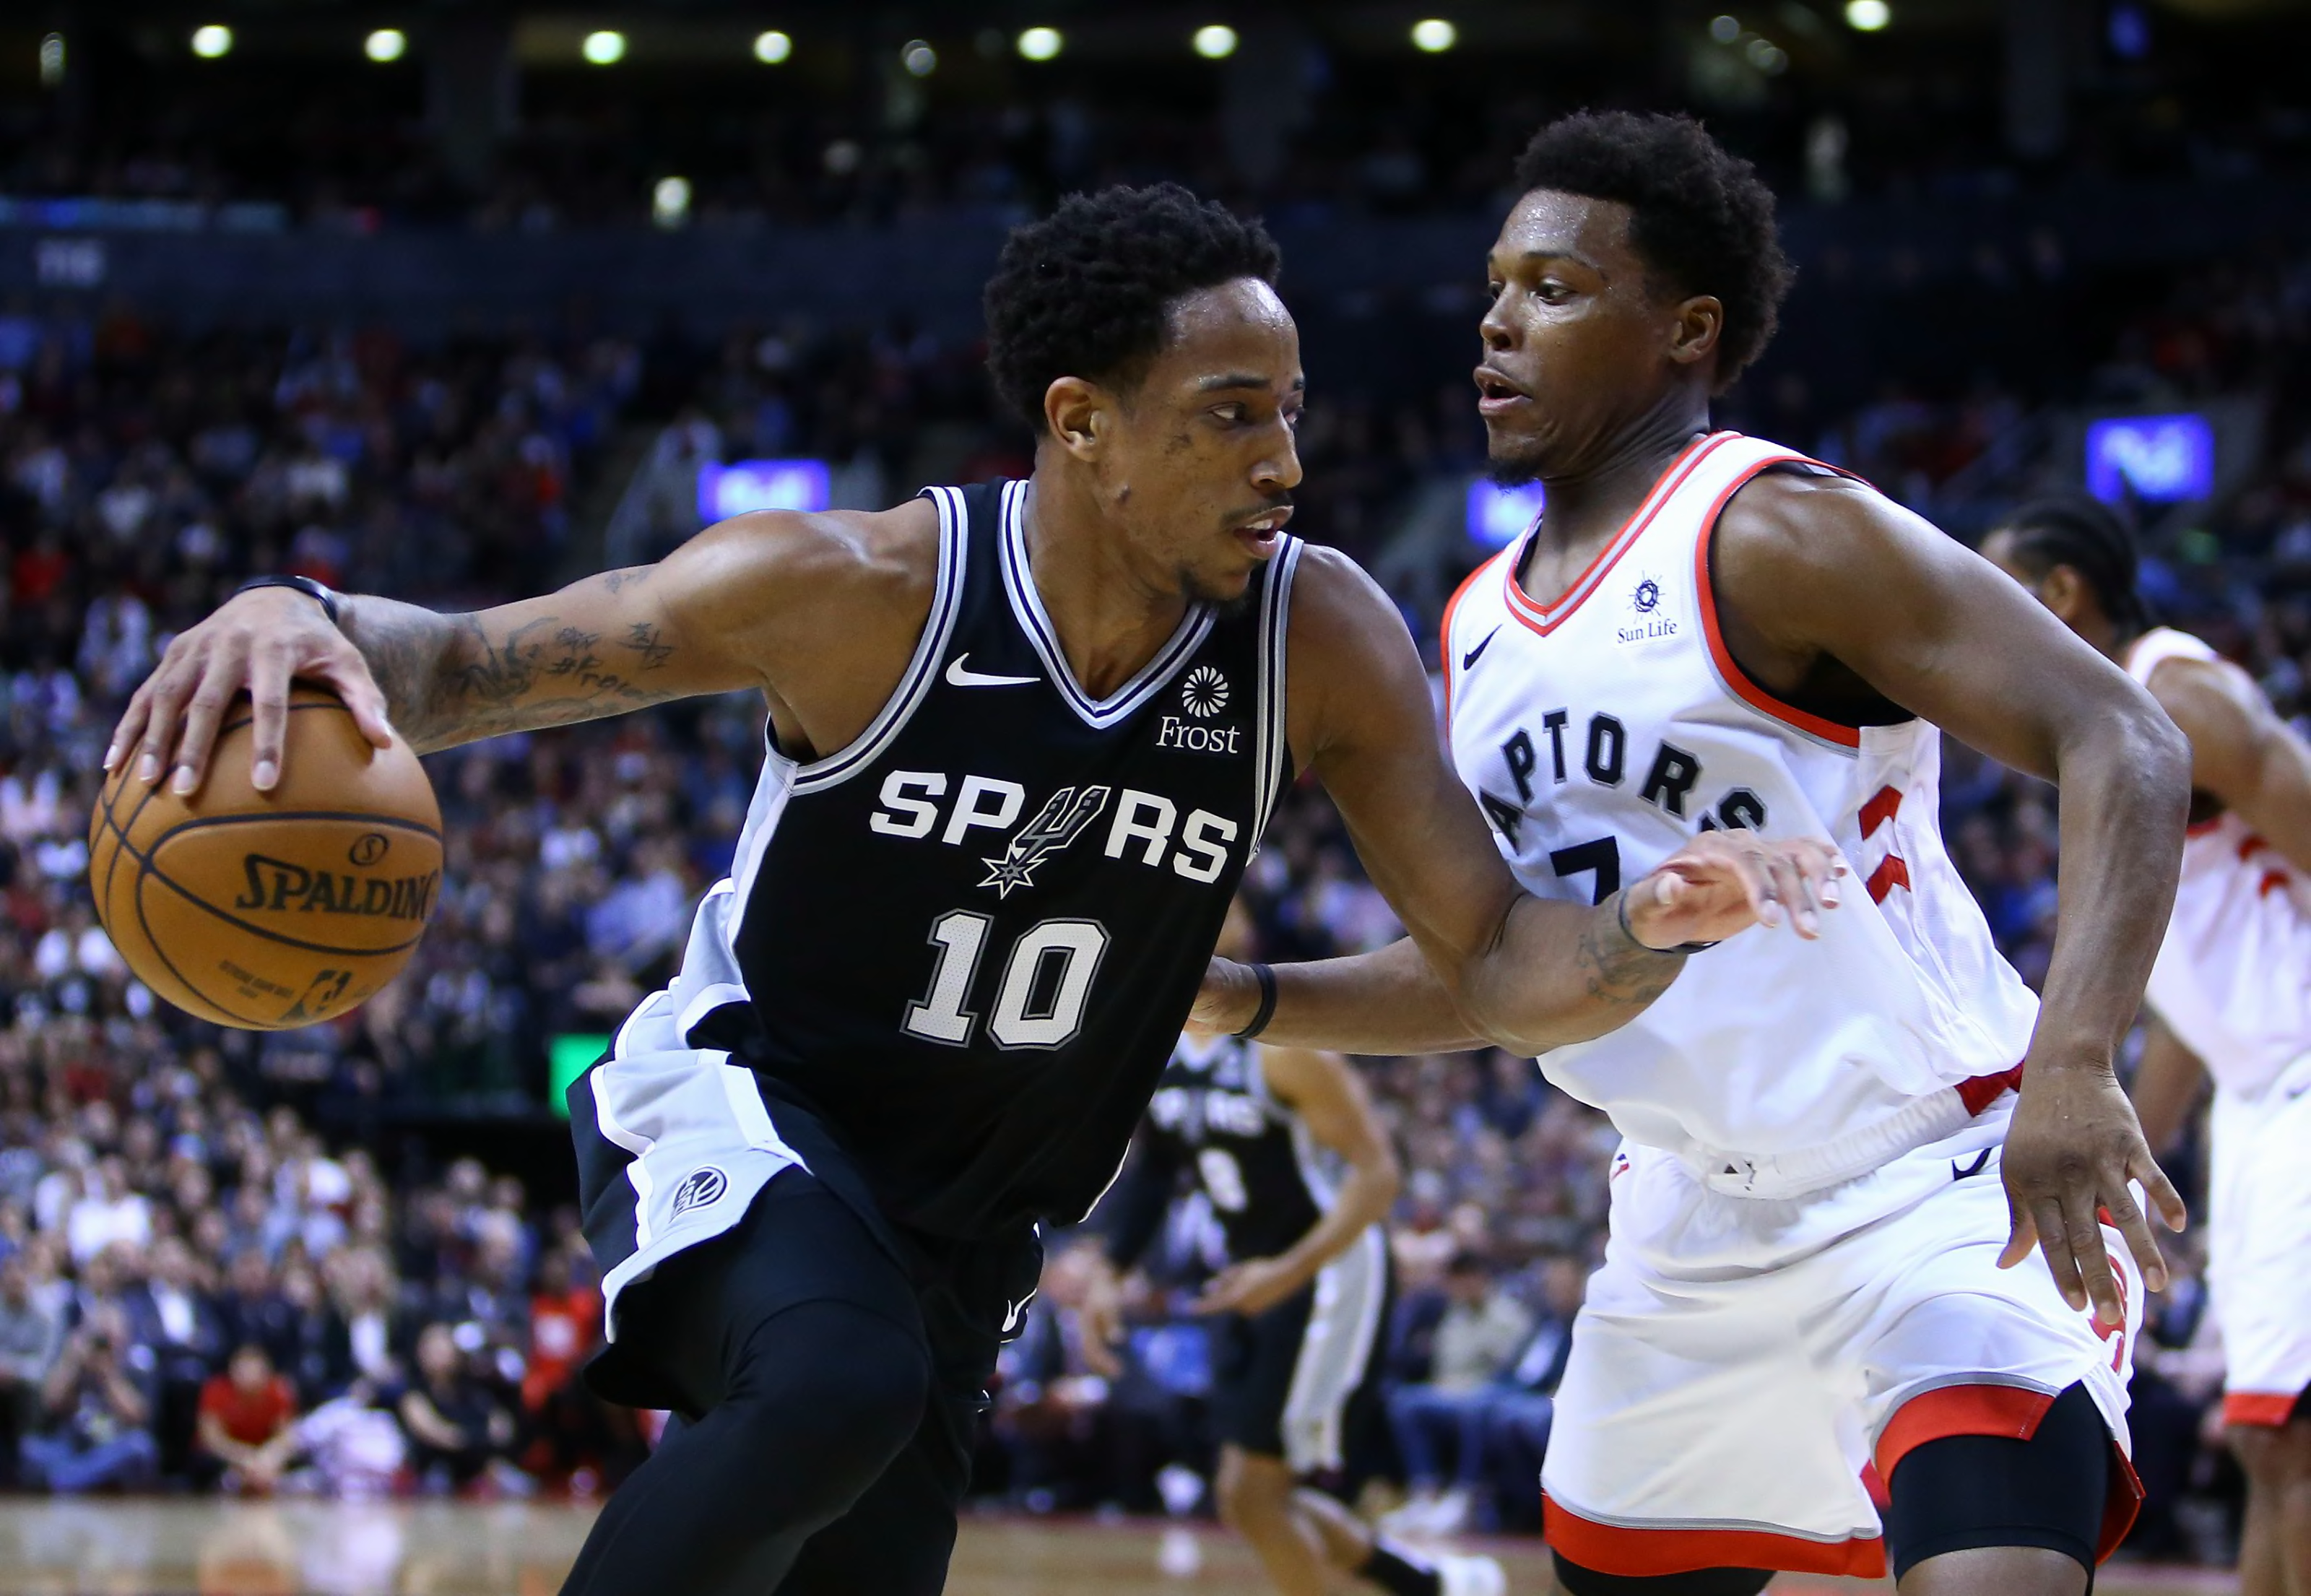 NBA All-Star 2018: Kyle Lowry and DeMar DeRozan will play together